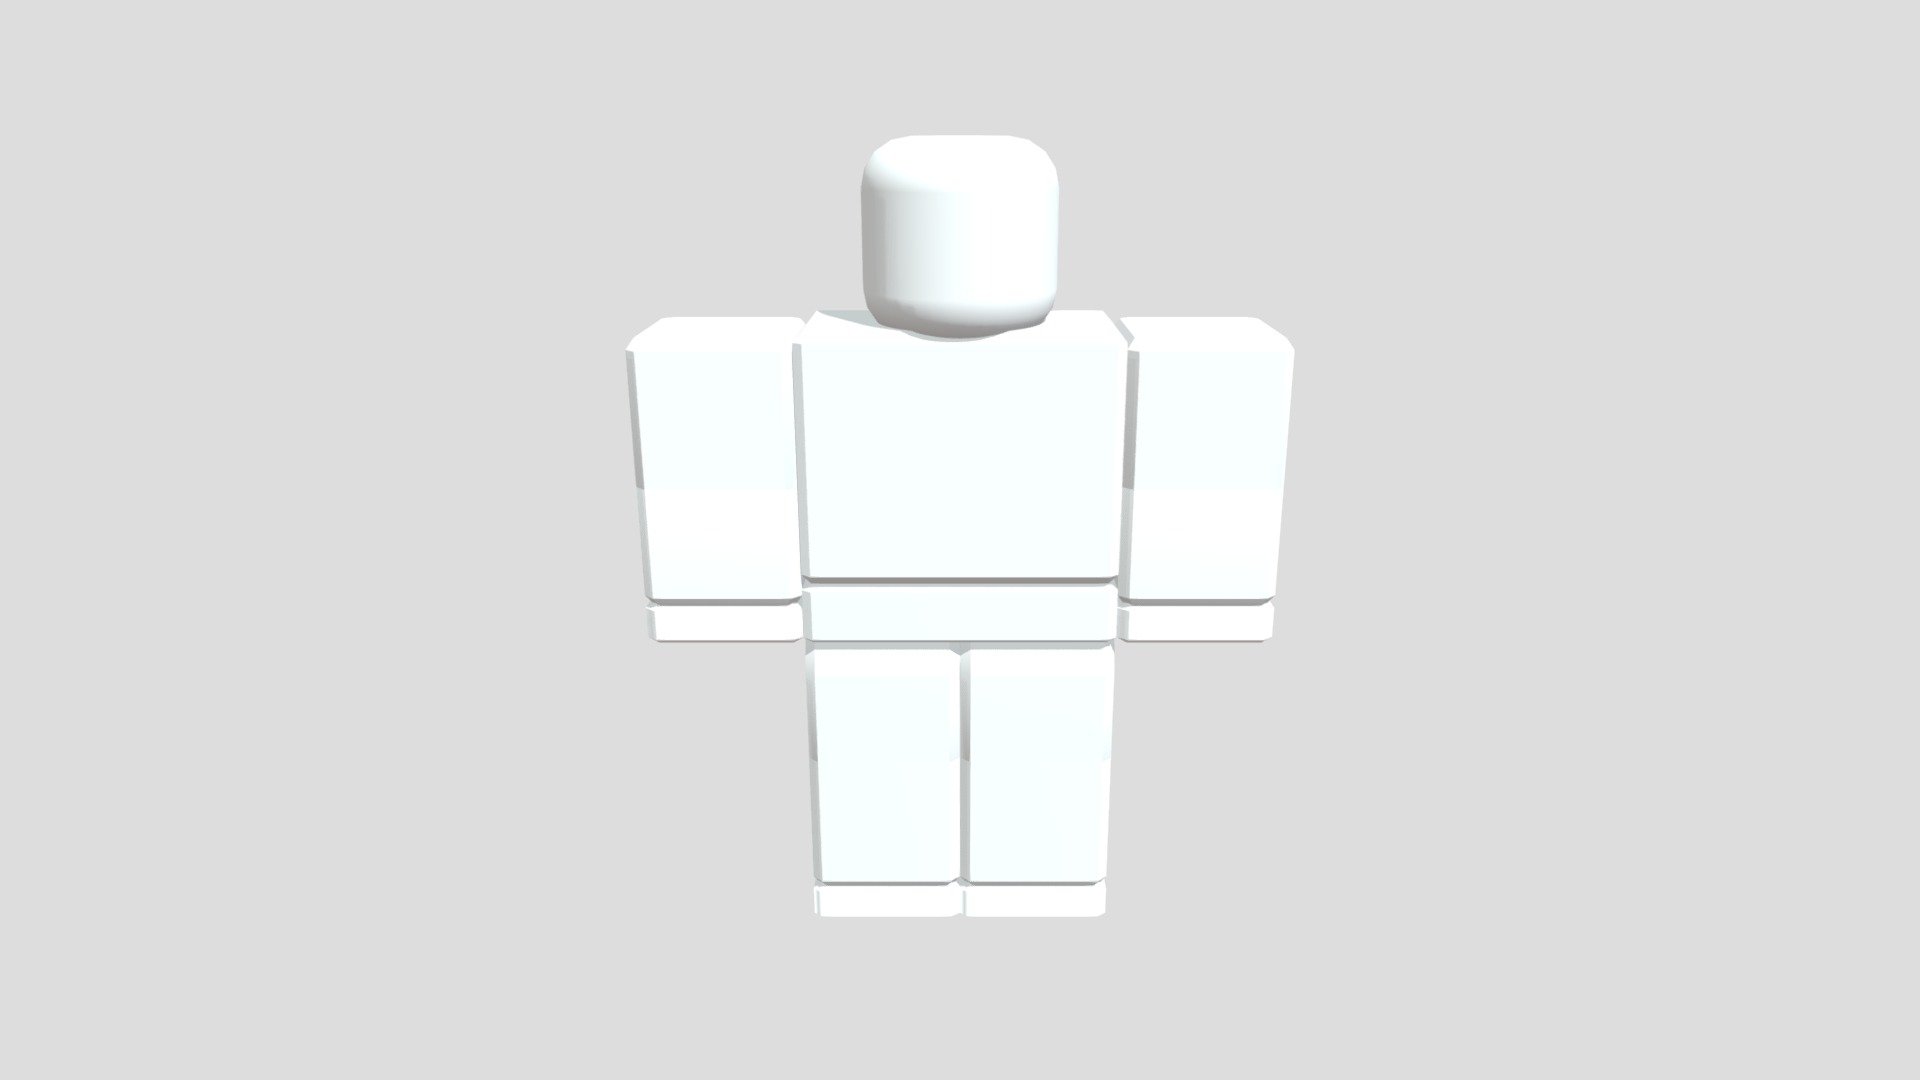 Back Again Here Some Free Templates - Roblox Templates